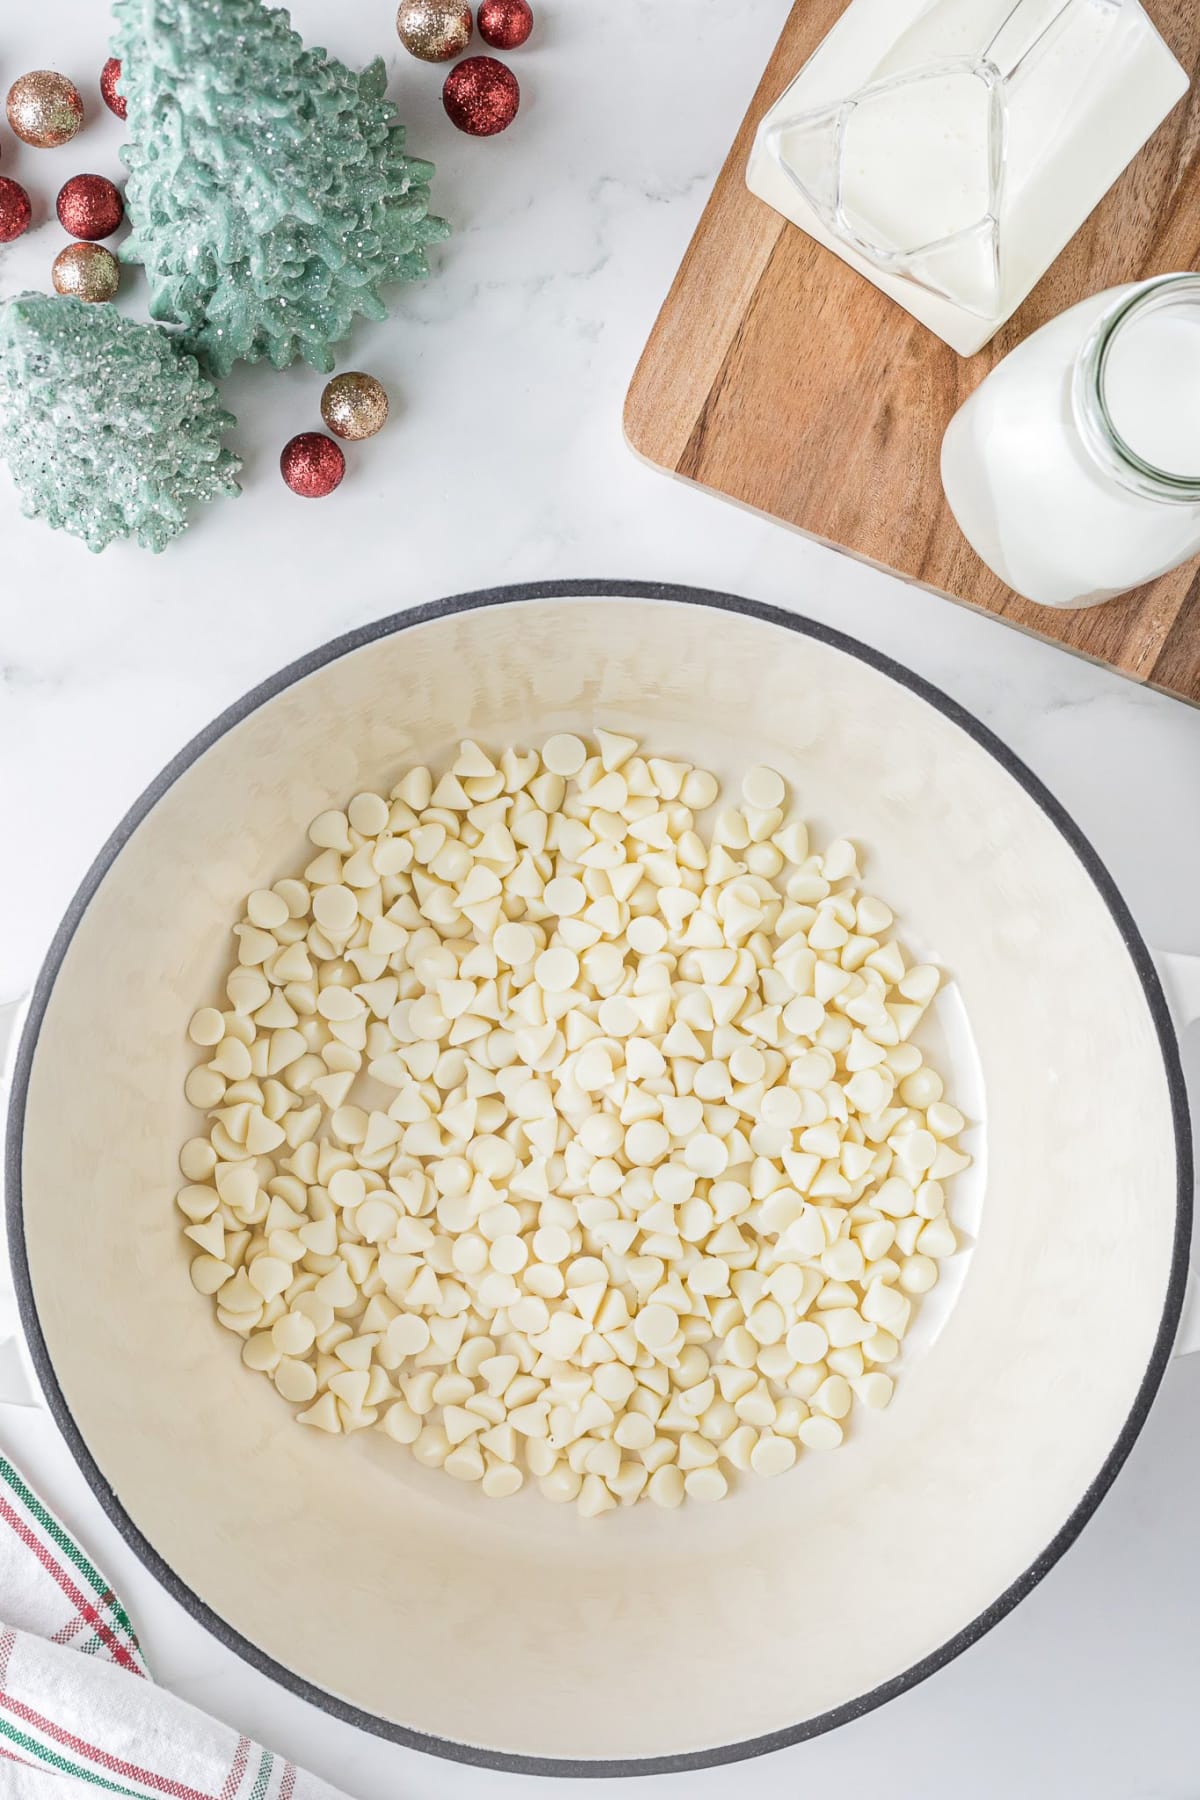 Big bowl of white chocolate chips on a white counter with holiday decor in the background